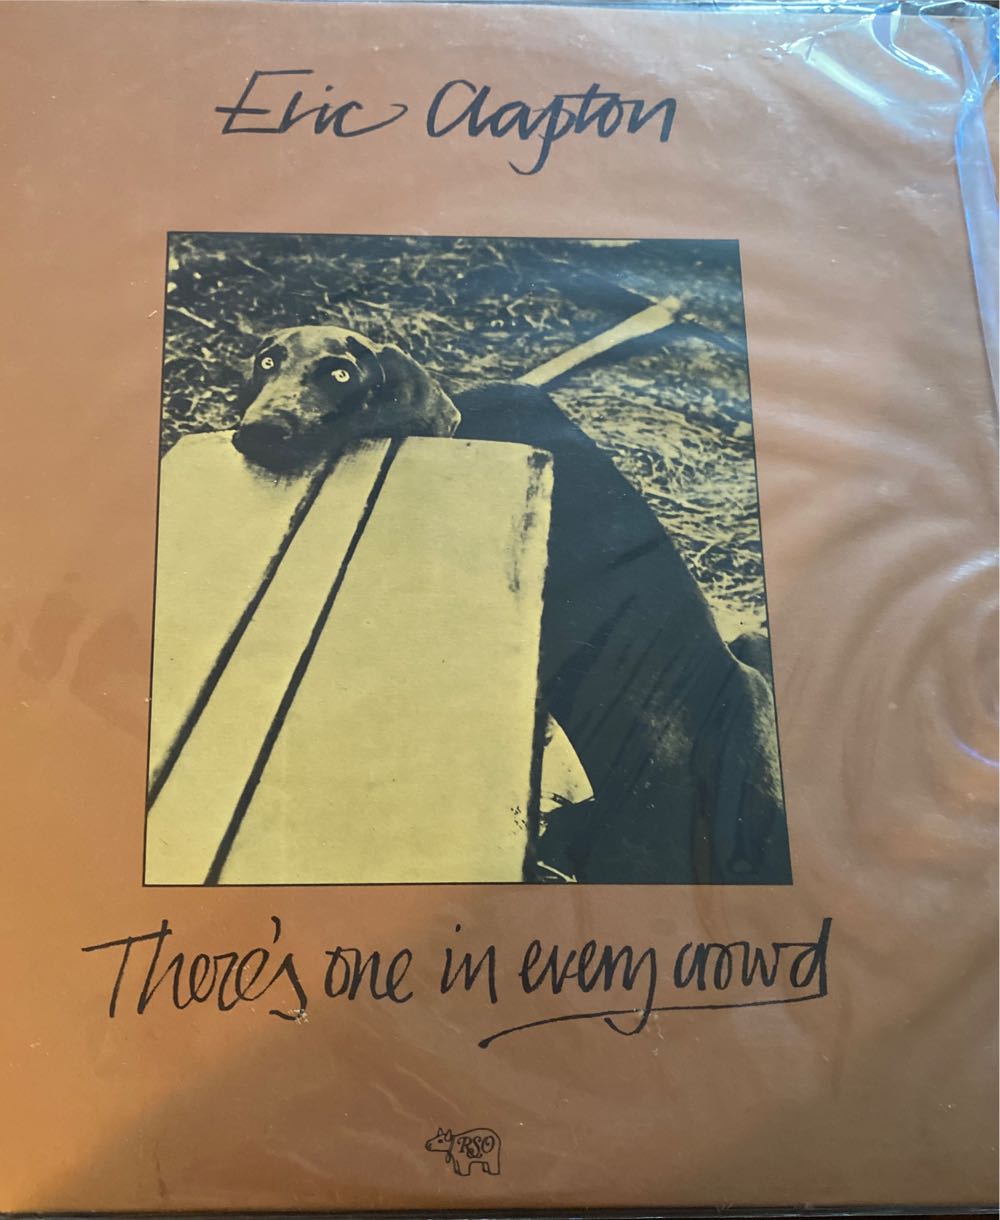 Theres One In Every Crowd - Eric Clapton (12”) music collectible - Main Image 1